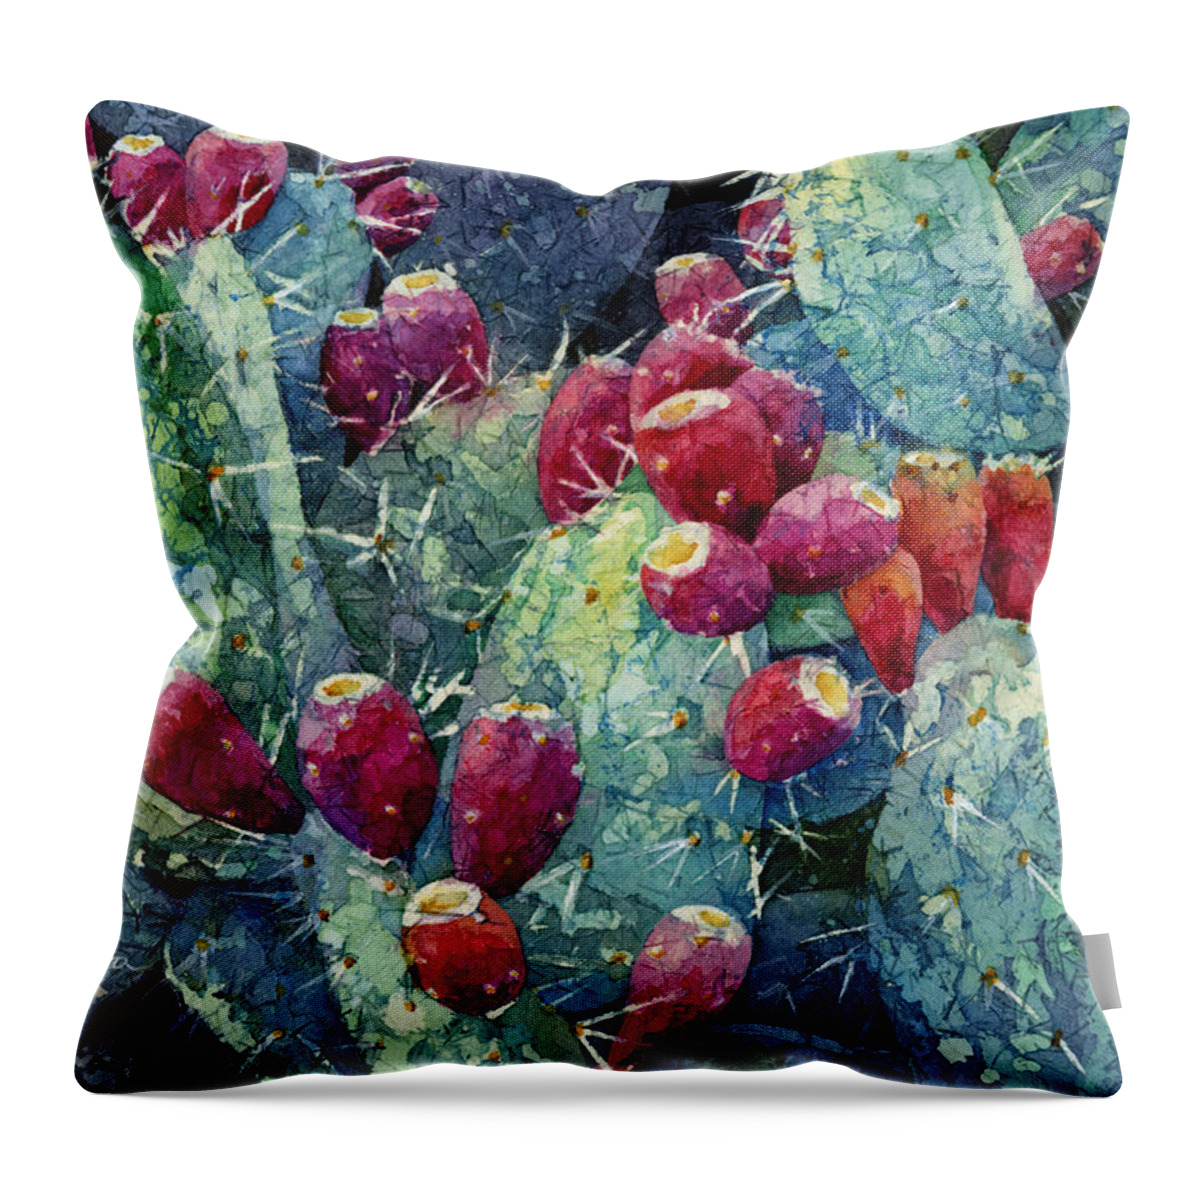 Cactus Throw Pillow featuring the painting Prickly Pear 2 by Hailey E Herrera